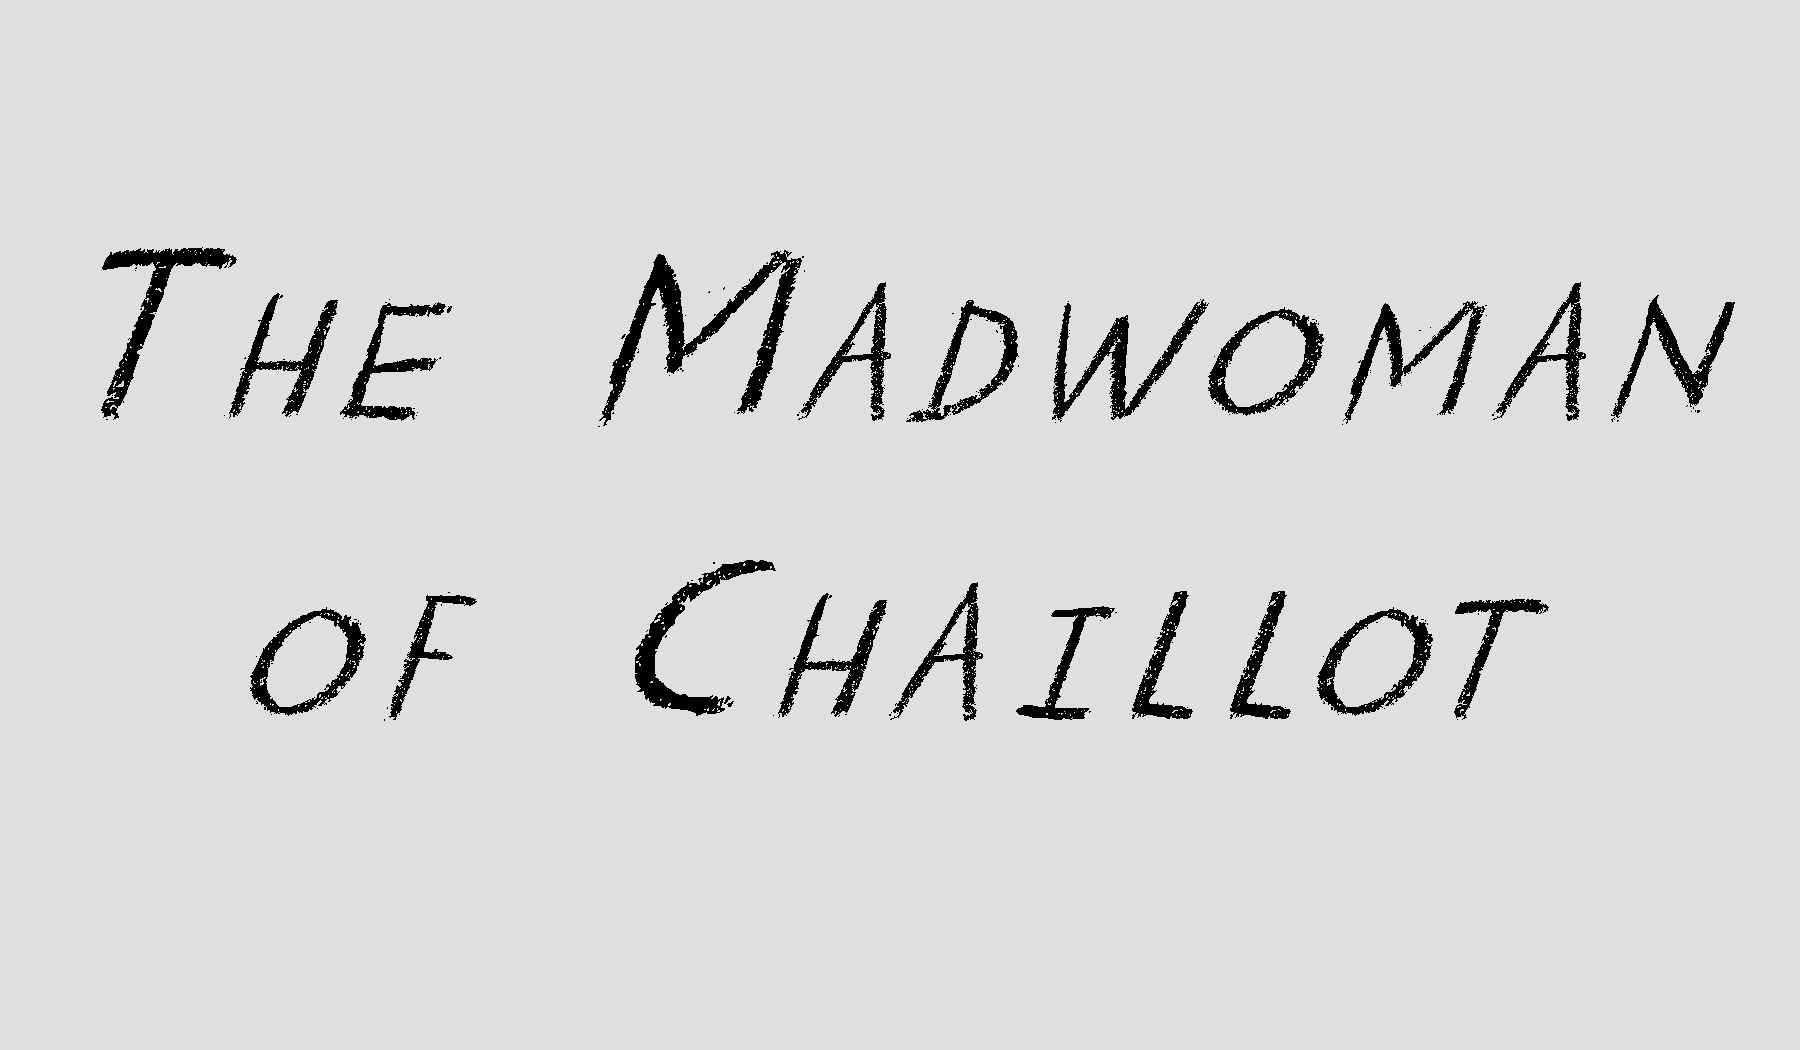 The Madwoman of Chaillot